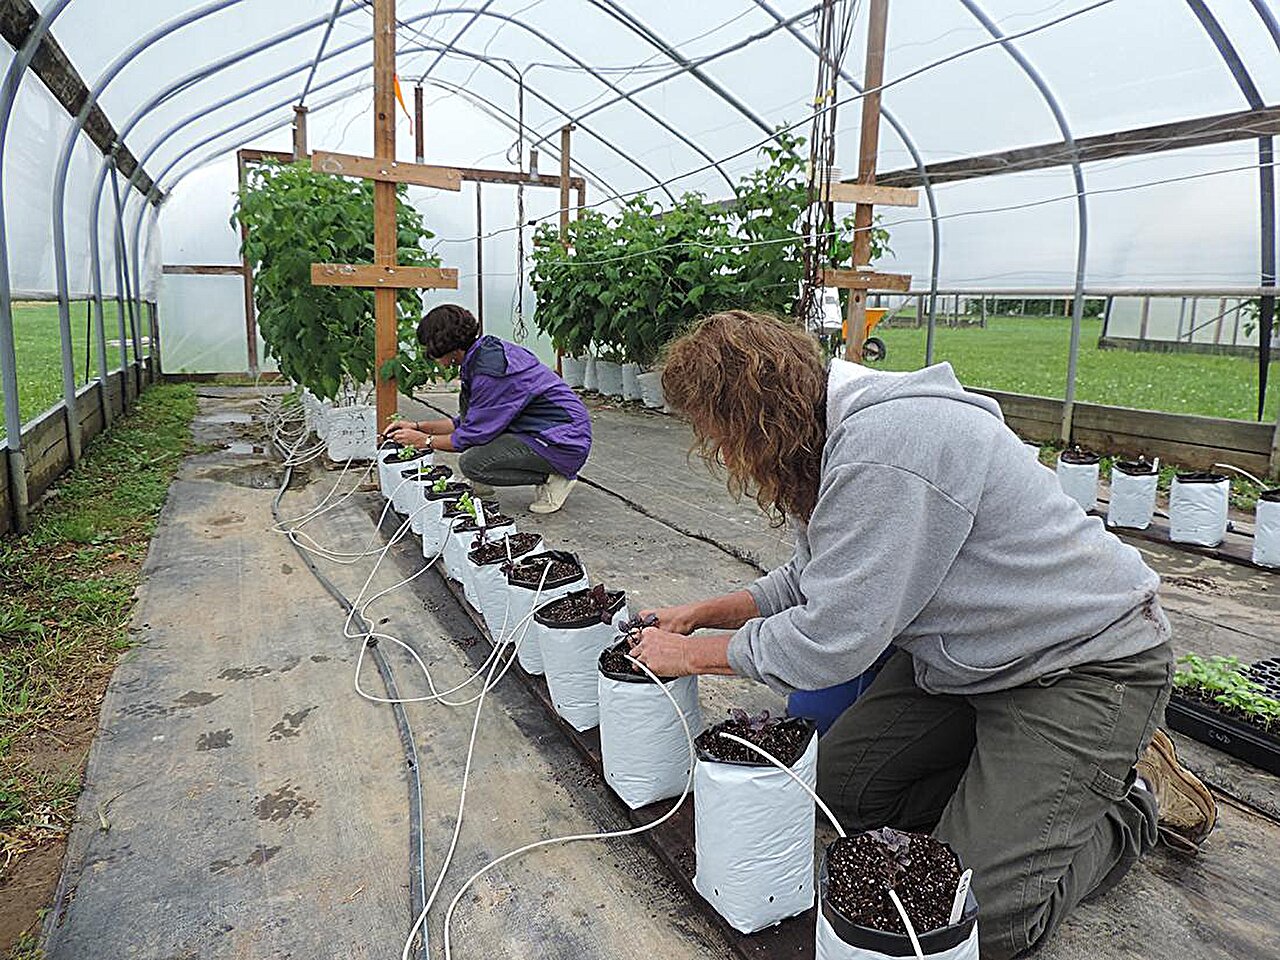 photo of Type of plastic film on high tunnels can filter sunlight, influence plant growth image